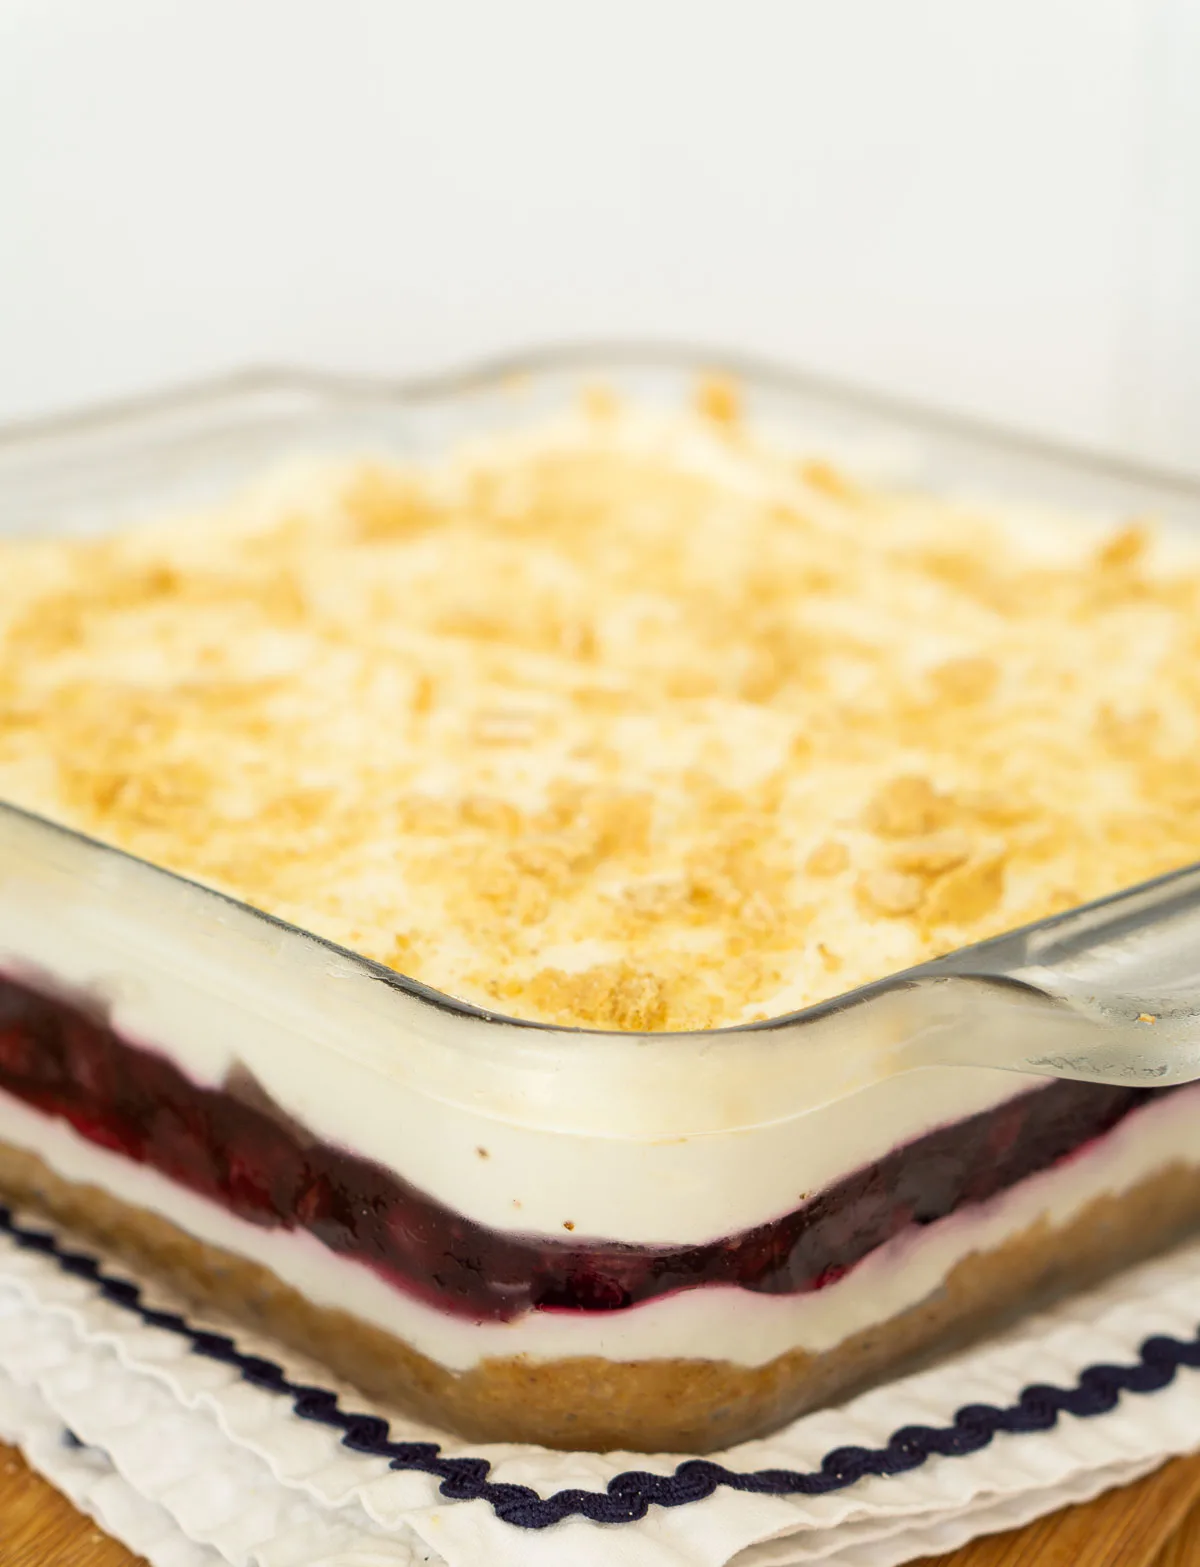 Blueberry delight no-bake blueberry dessert topped with graham cracker crumbs.